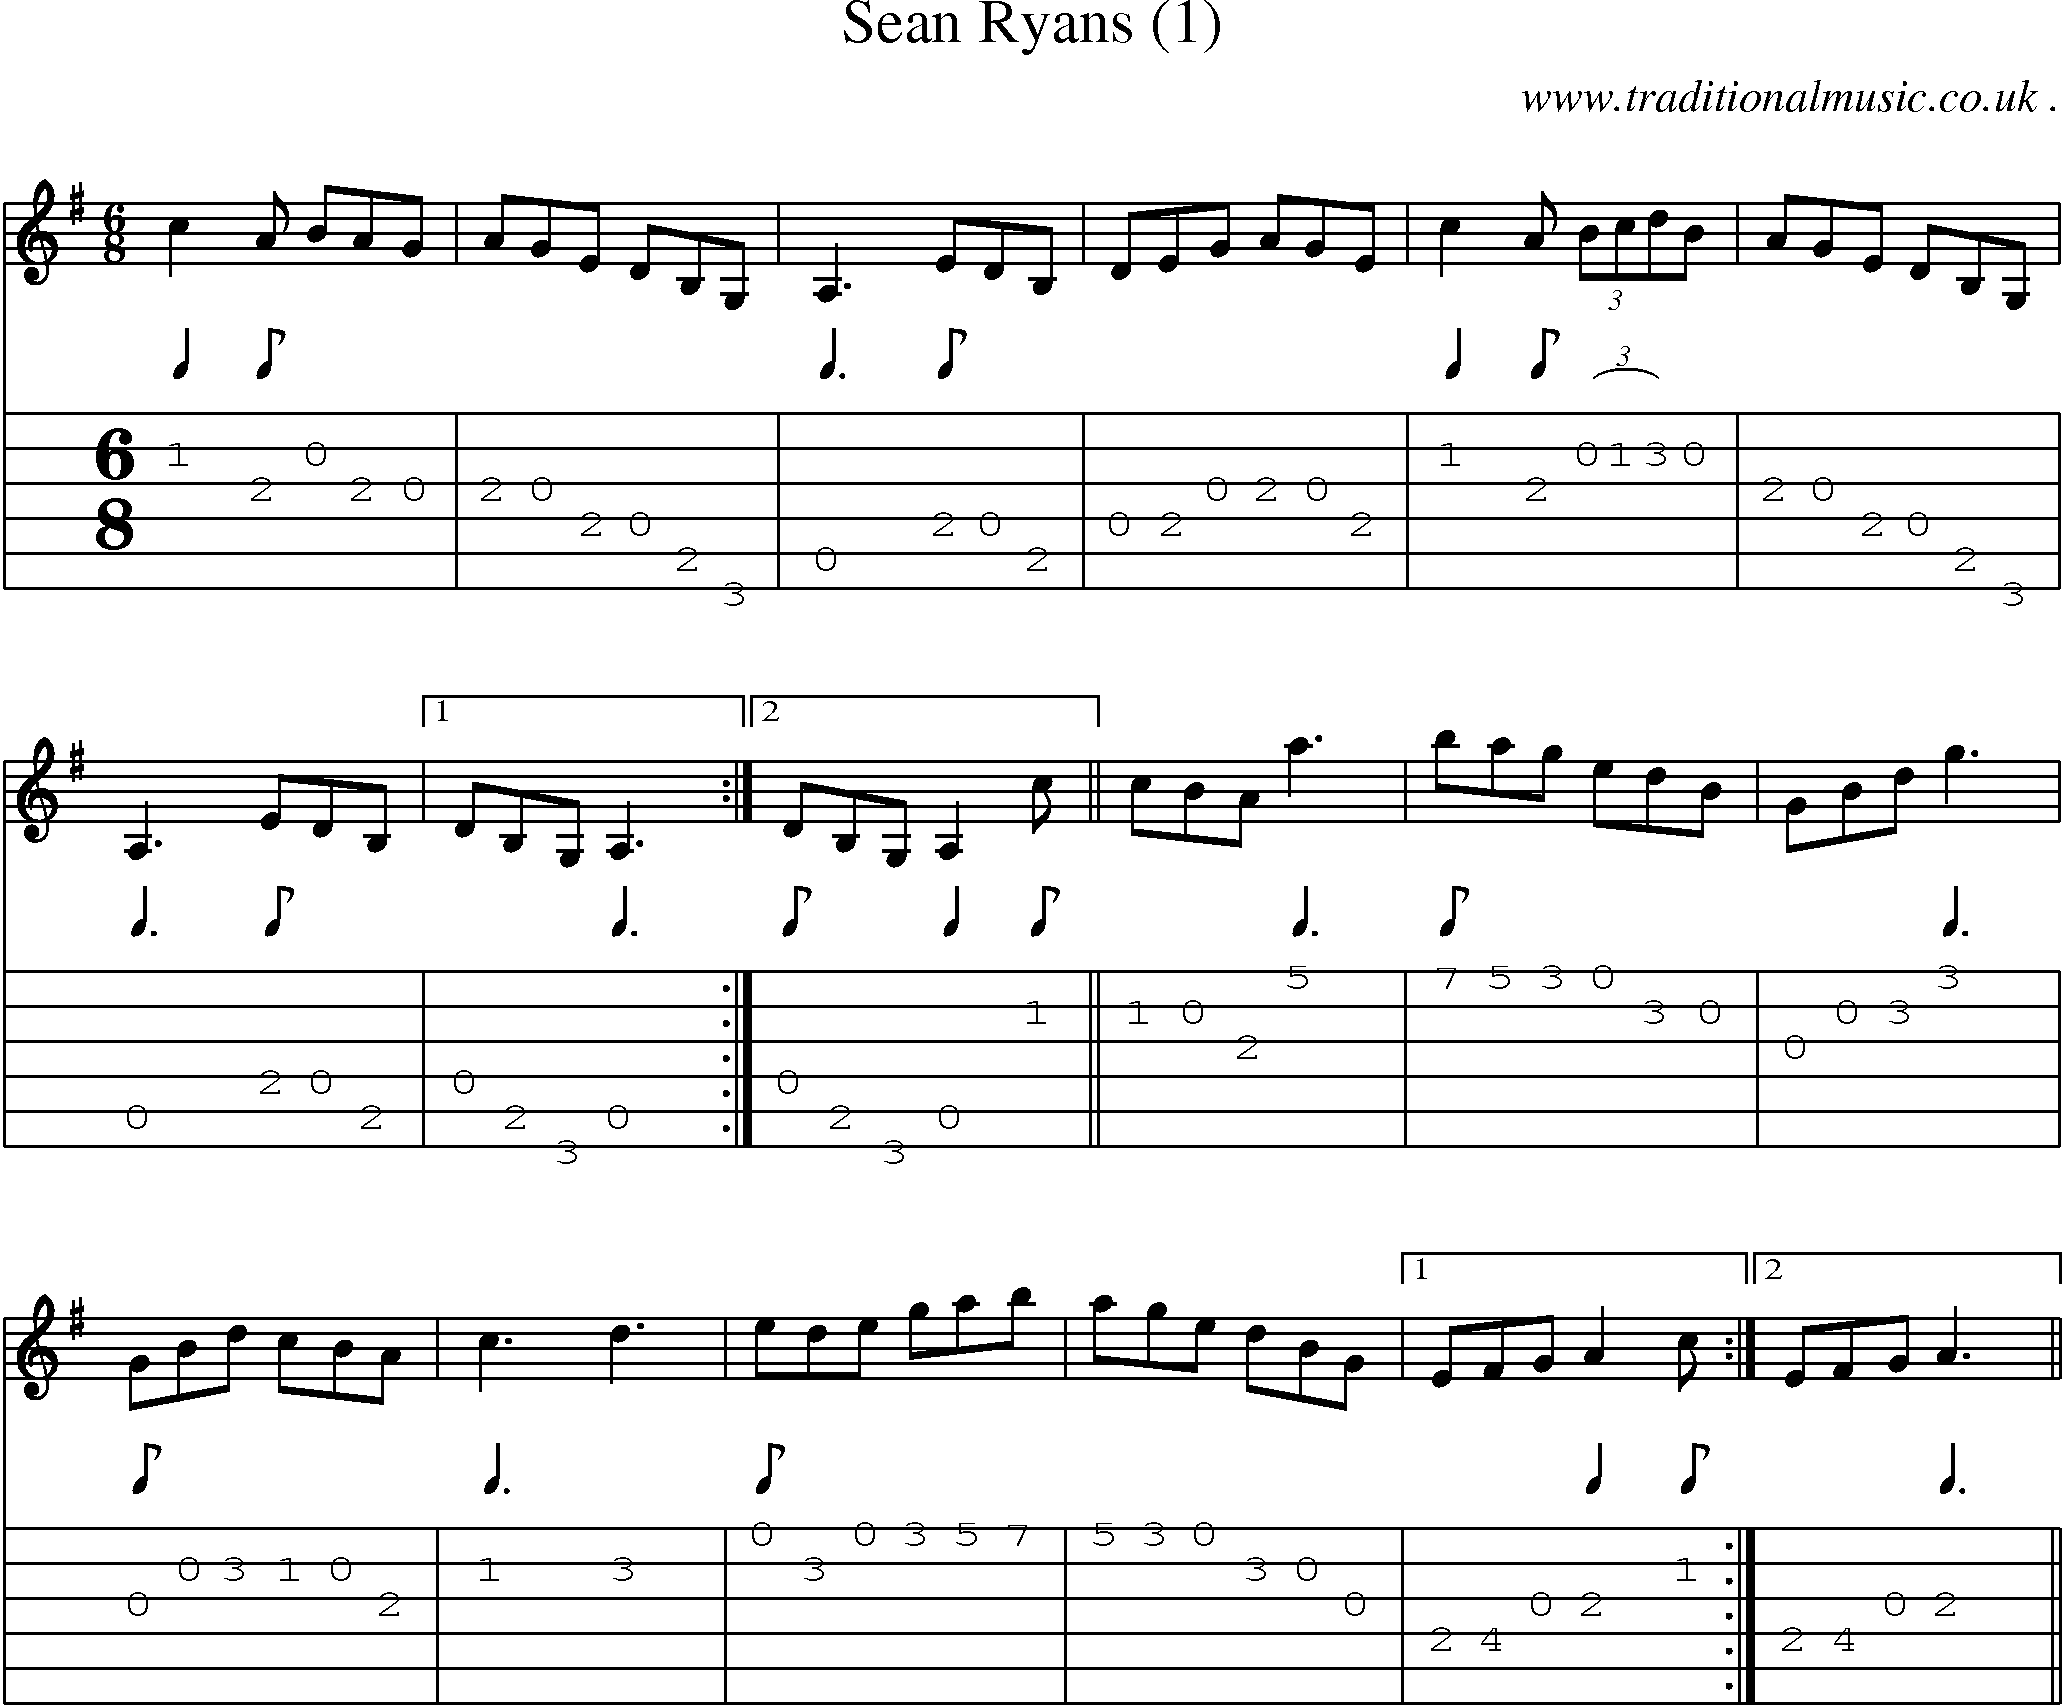 Sheet-Music and Guitar Tabs for Sean Ryans (1)